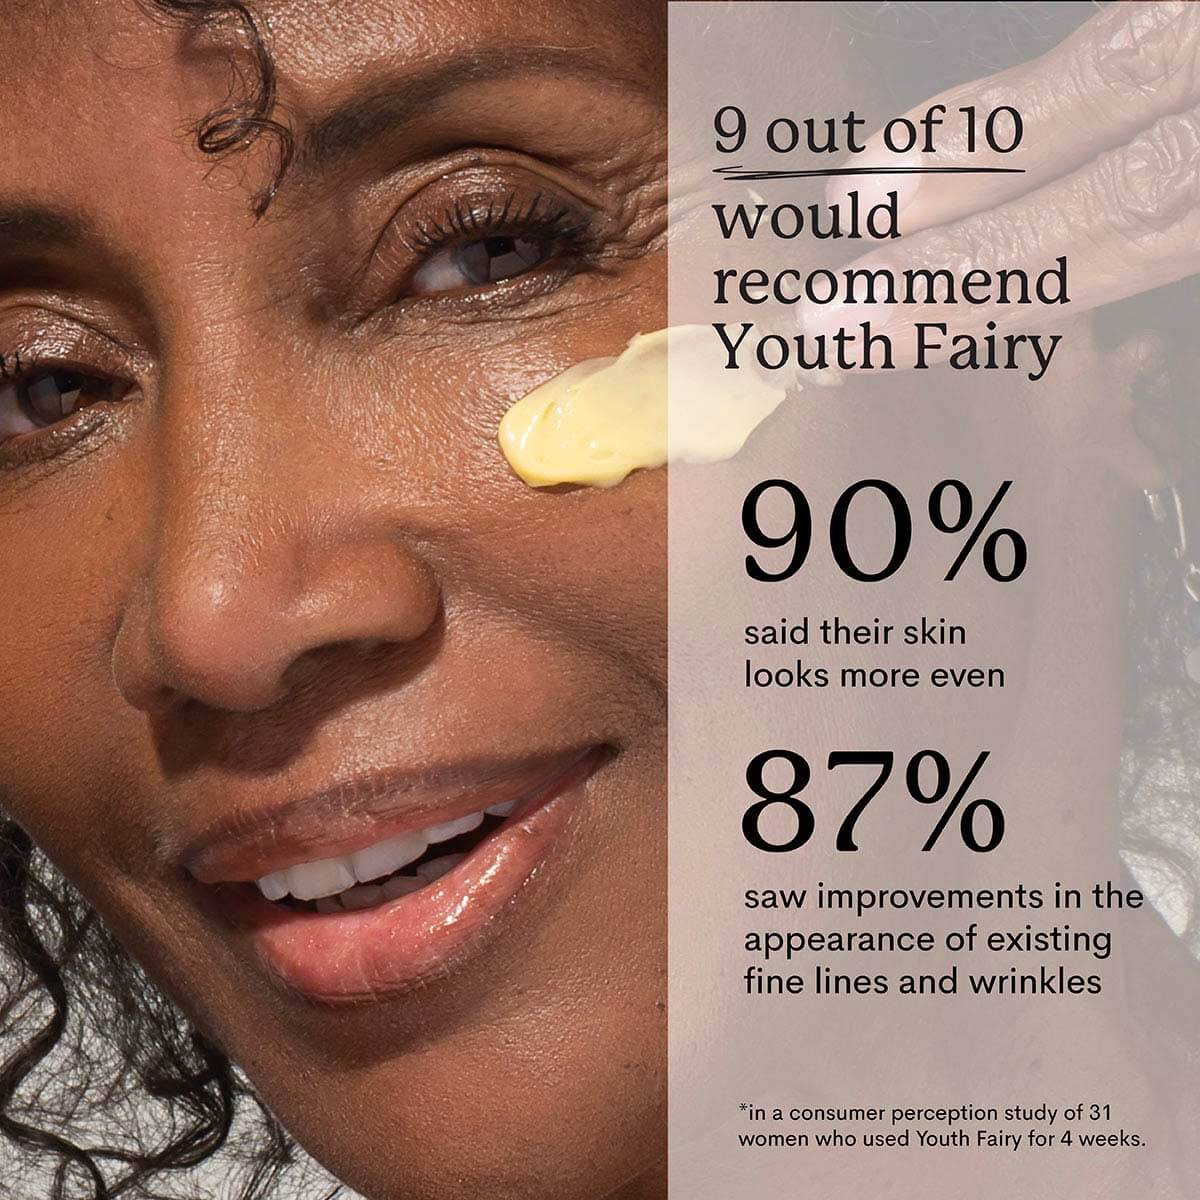 woman applying retinol moisturizer and stats showing 9 out of 10 would recommend Youth Fairy